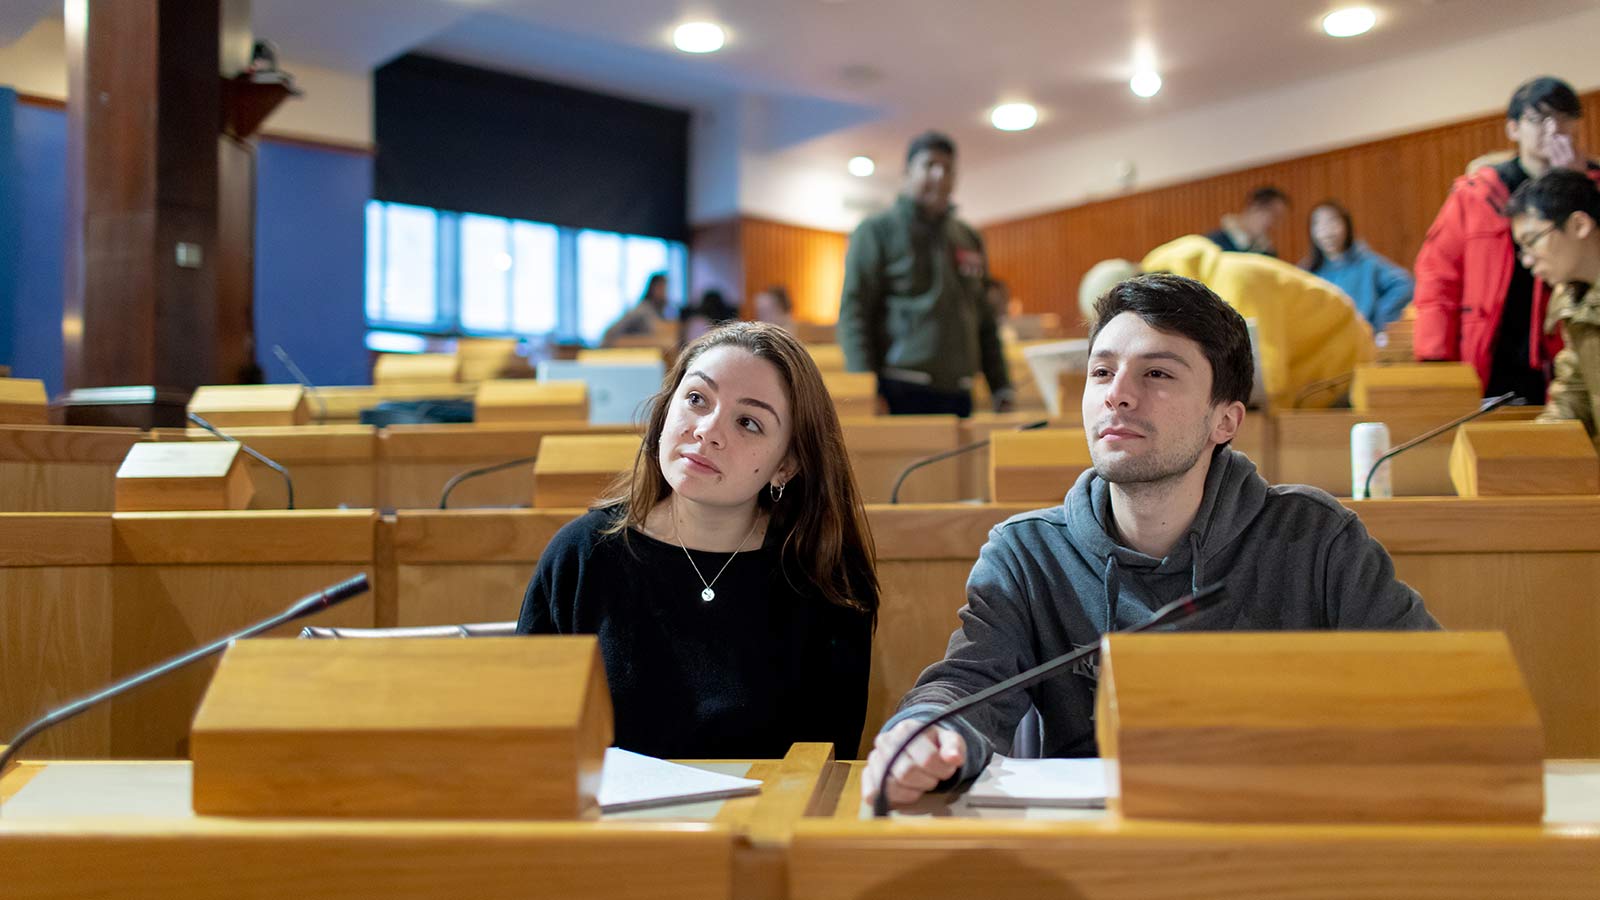 Aberdeen University students in a lecture theatre